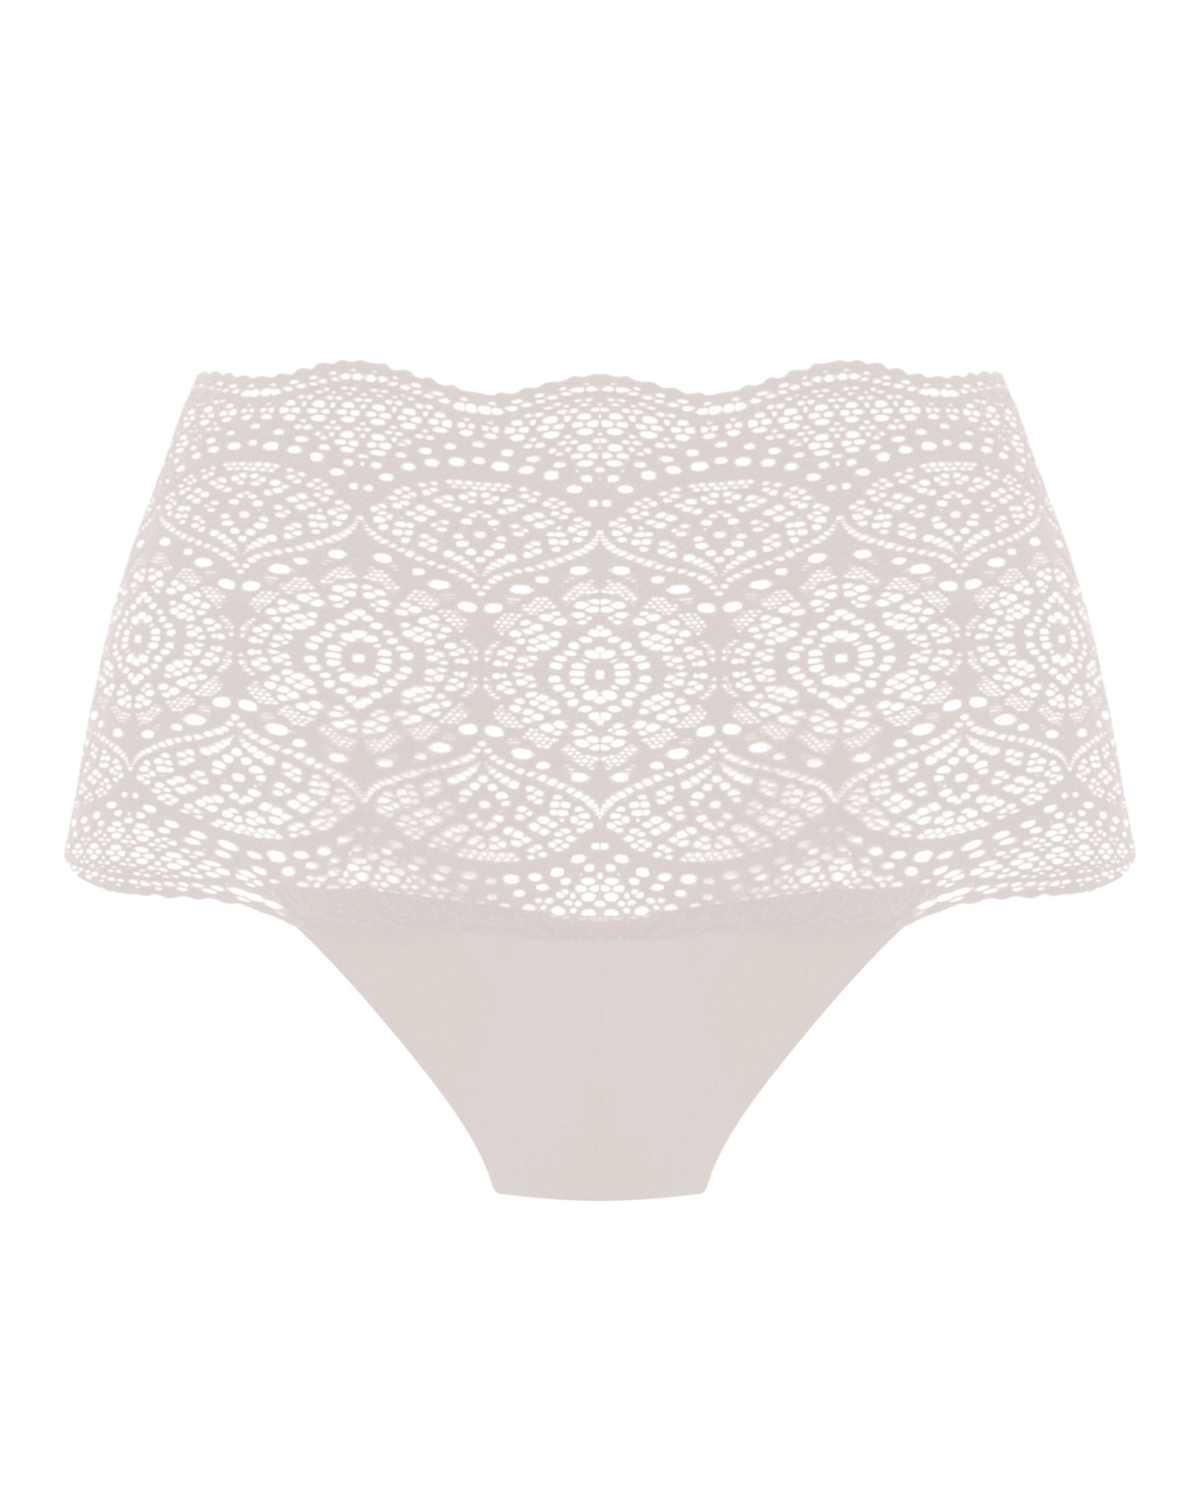 Flat lay of a wide lace band brief panty in white